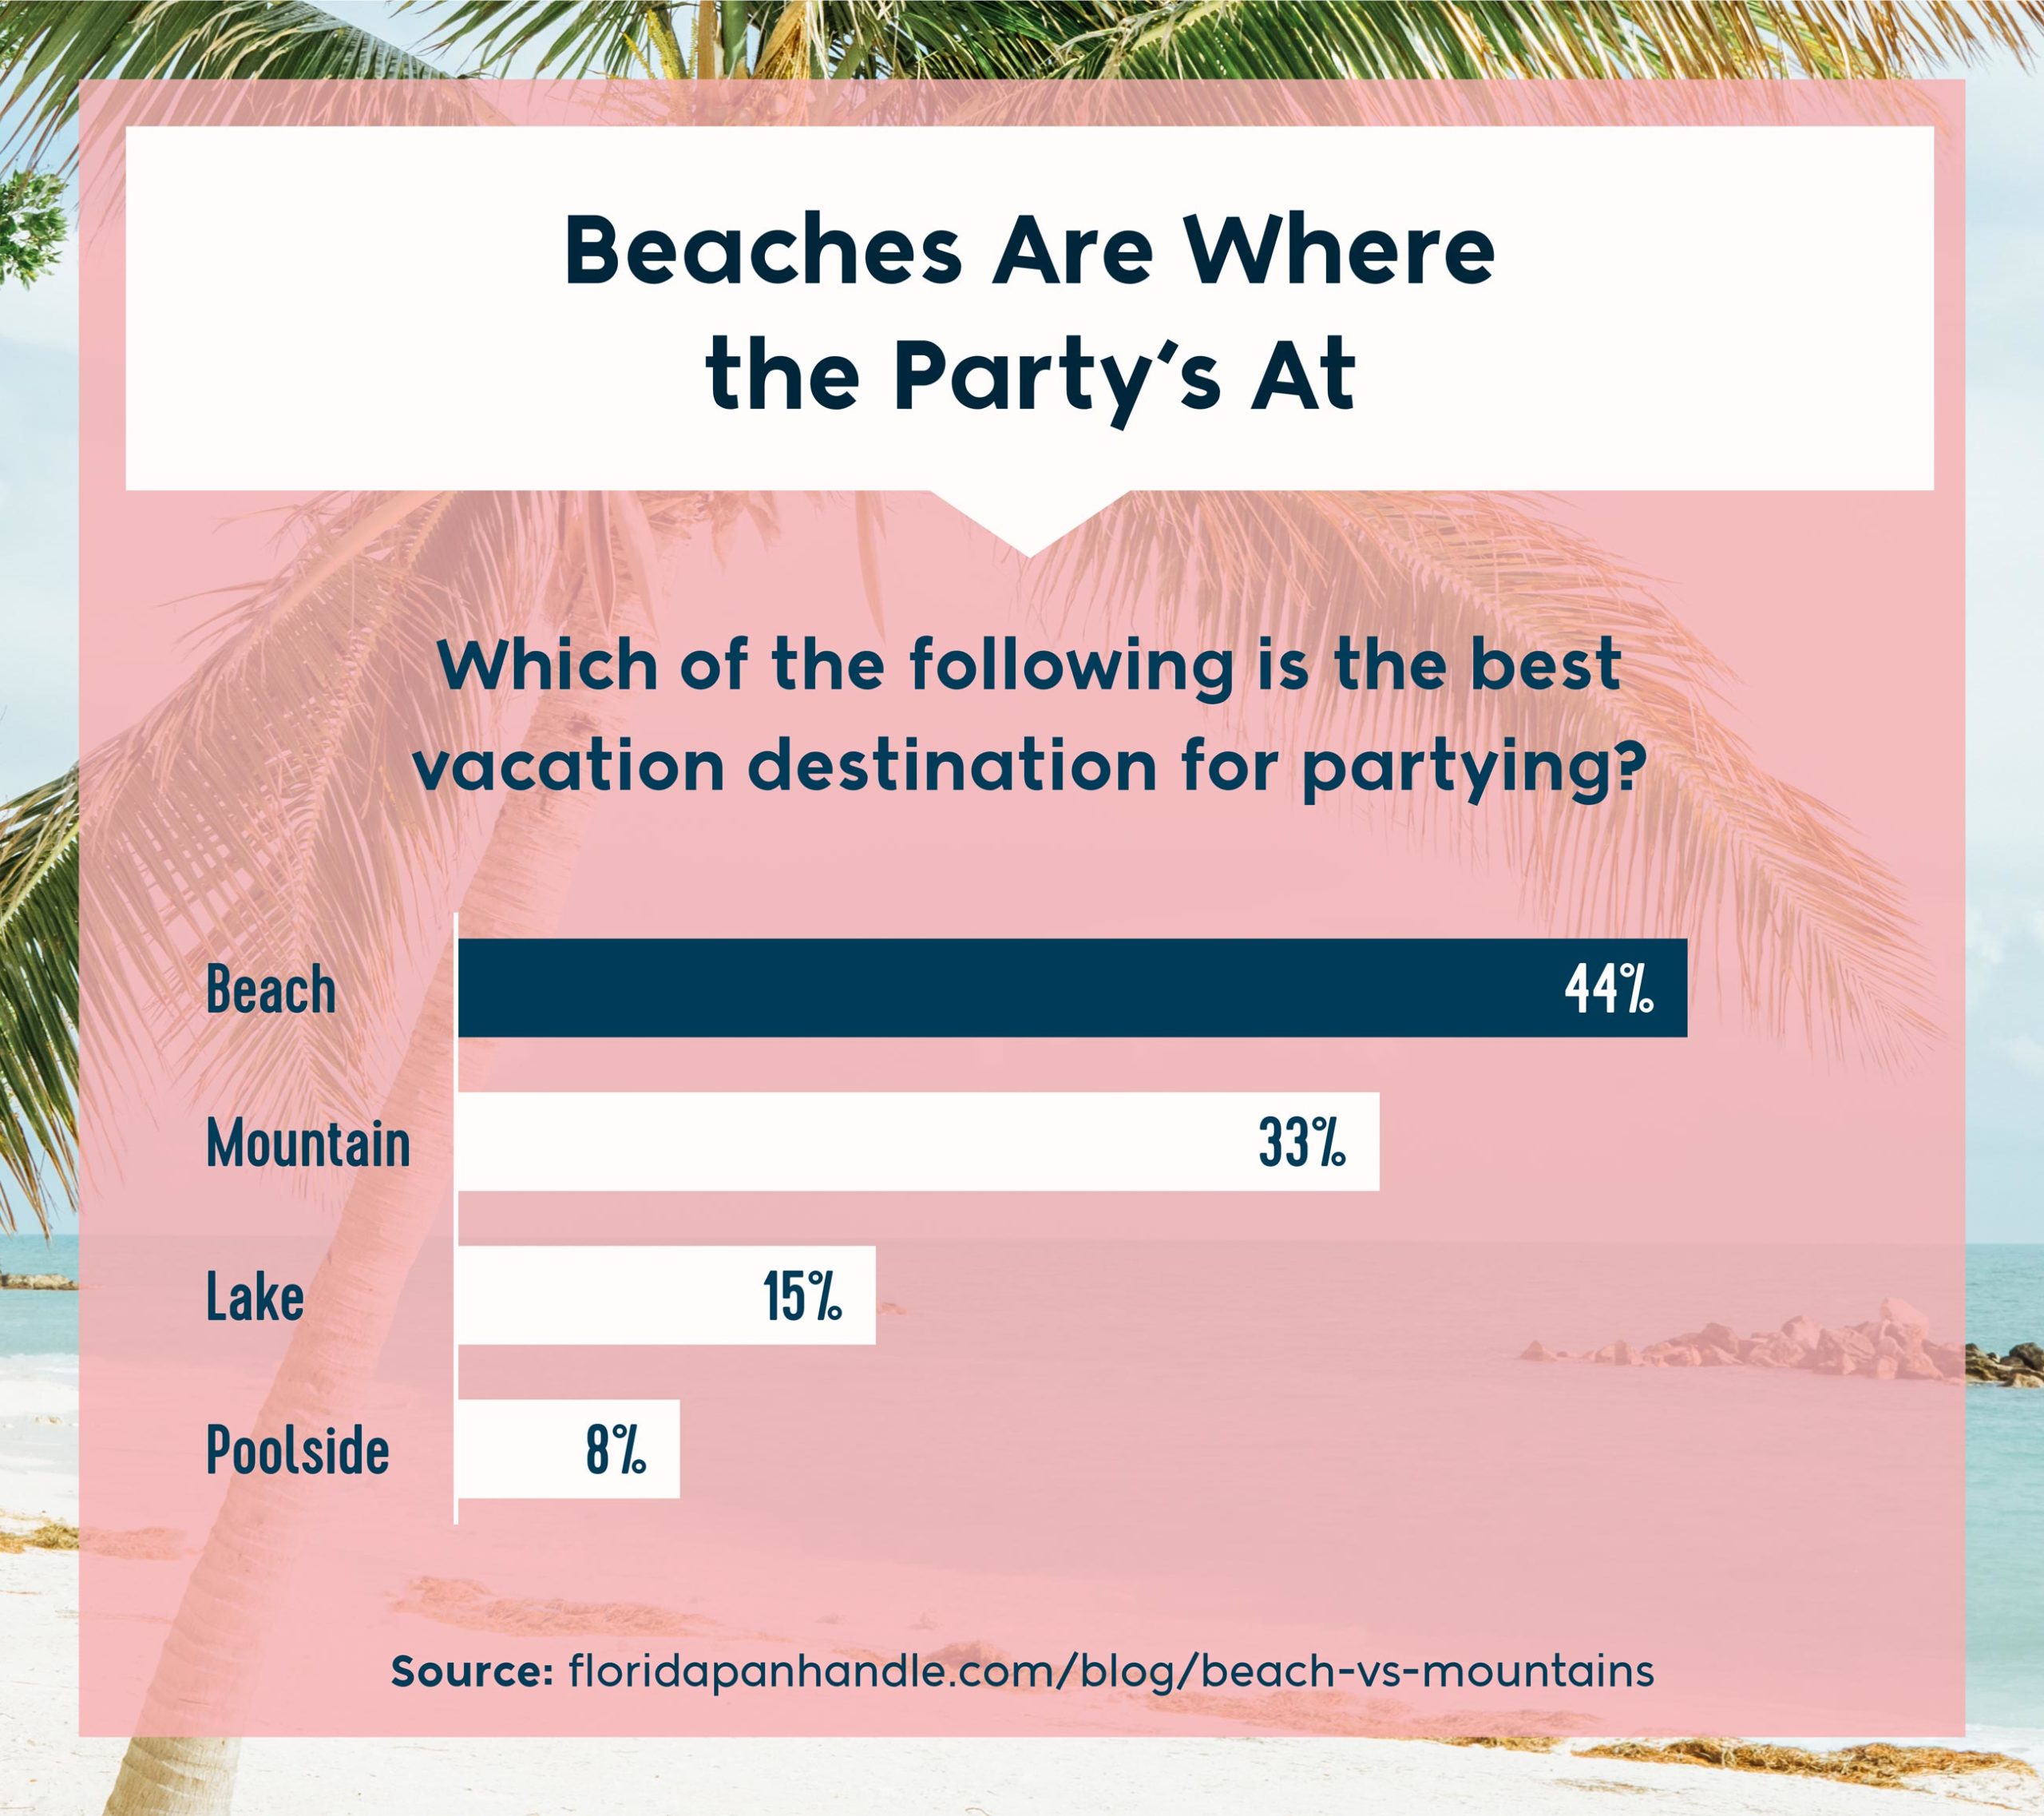 which of the following is the best vacation destination for partying?